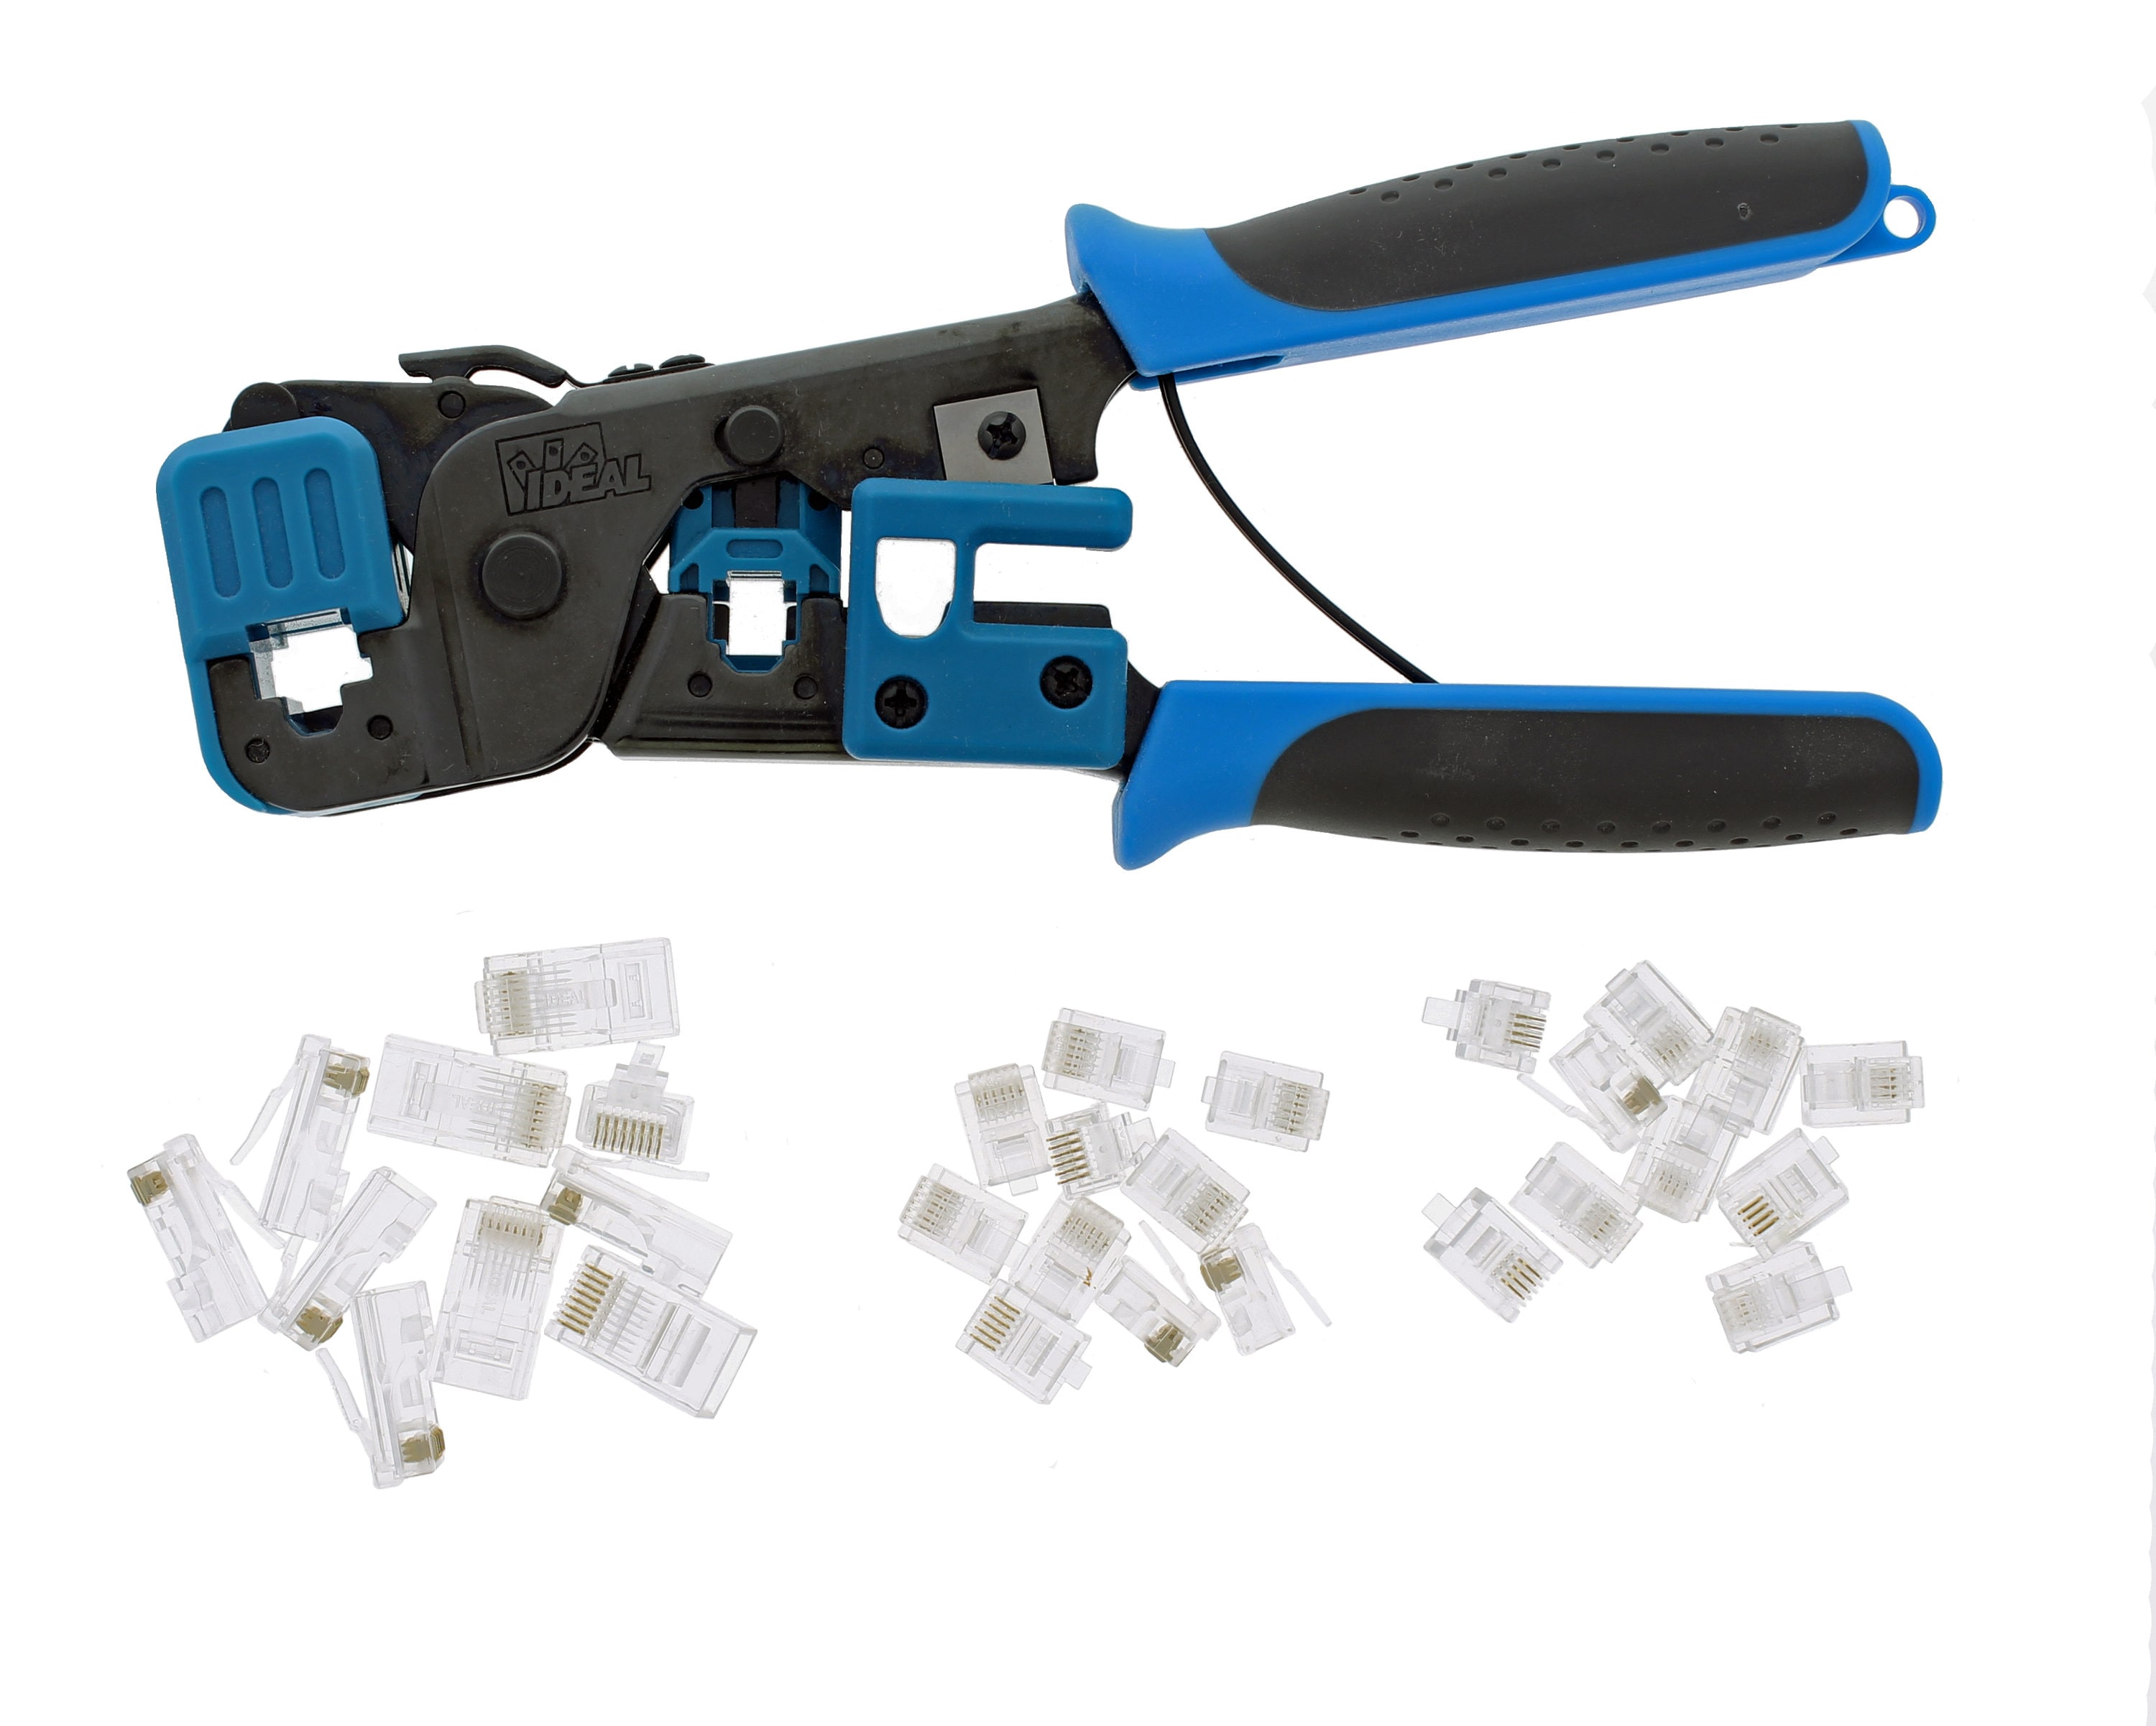 RJ45 RJ11 Cat6 Cat5 Punch Down Network Cable Wire Stripper Cutter Plier BC 